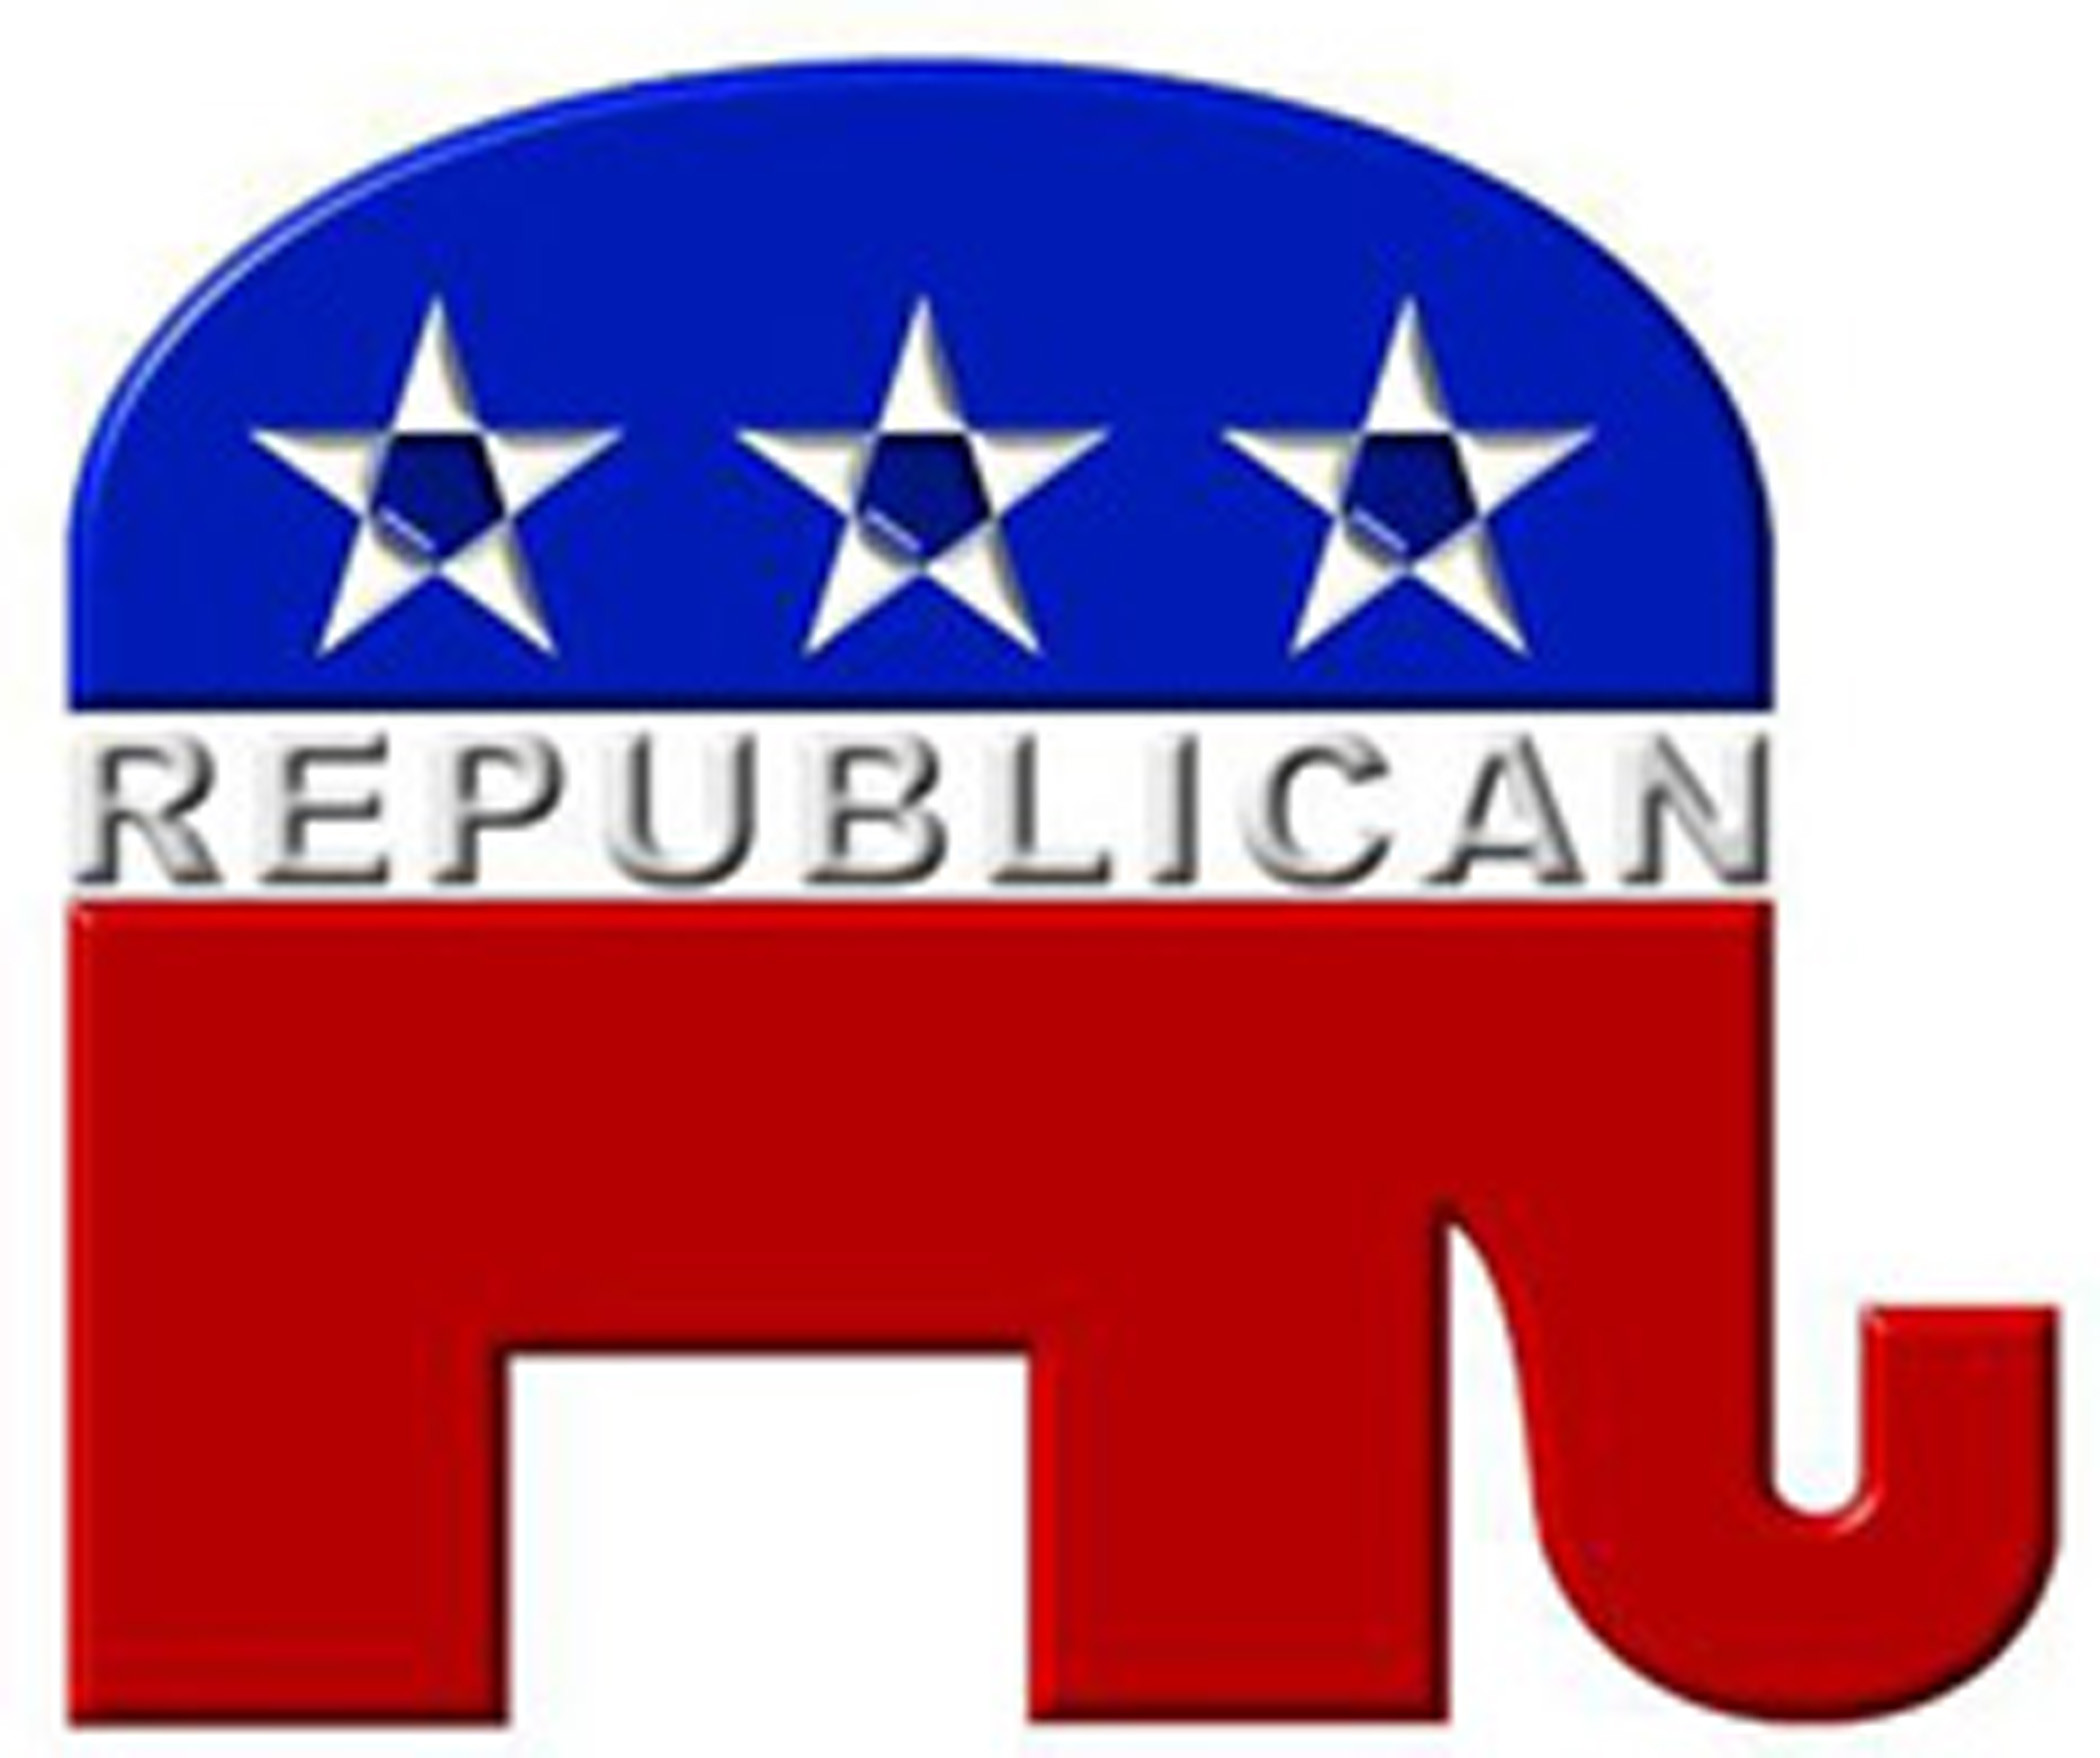 2100x1758 Images For Red Elephant Republican